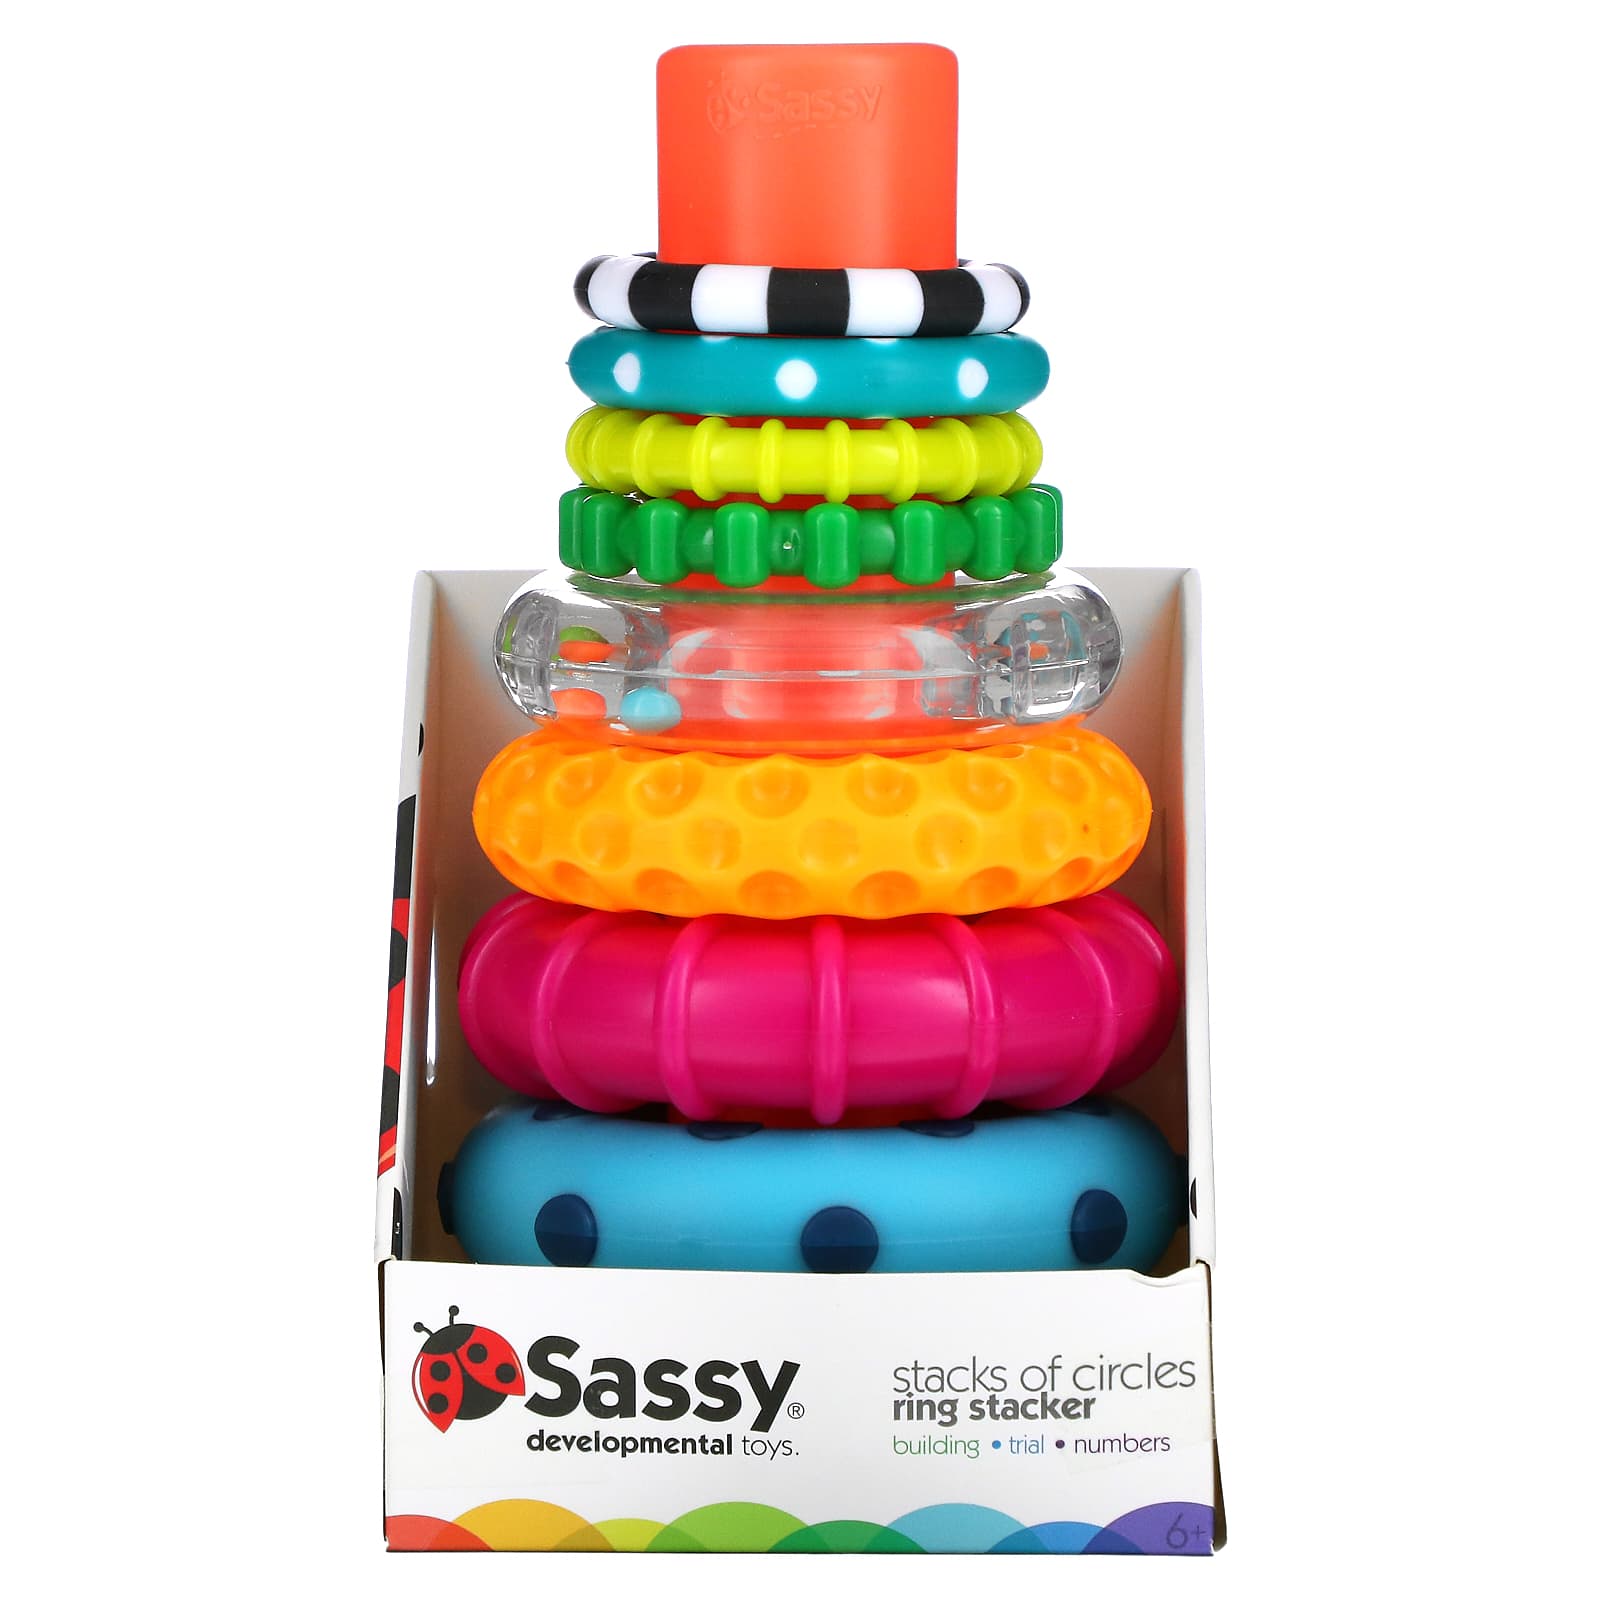 Sassy Stacks of Circles Stacking Ring Stem Learning Toy 9piece Set Age 6 Months for sale online 